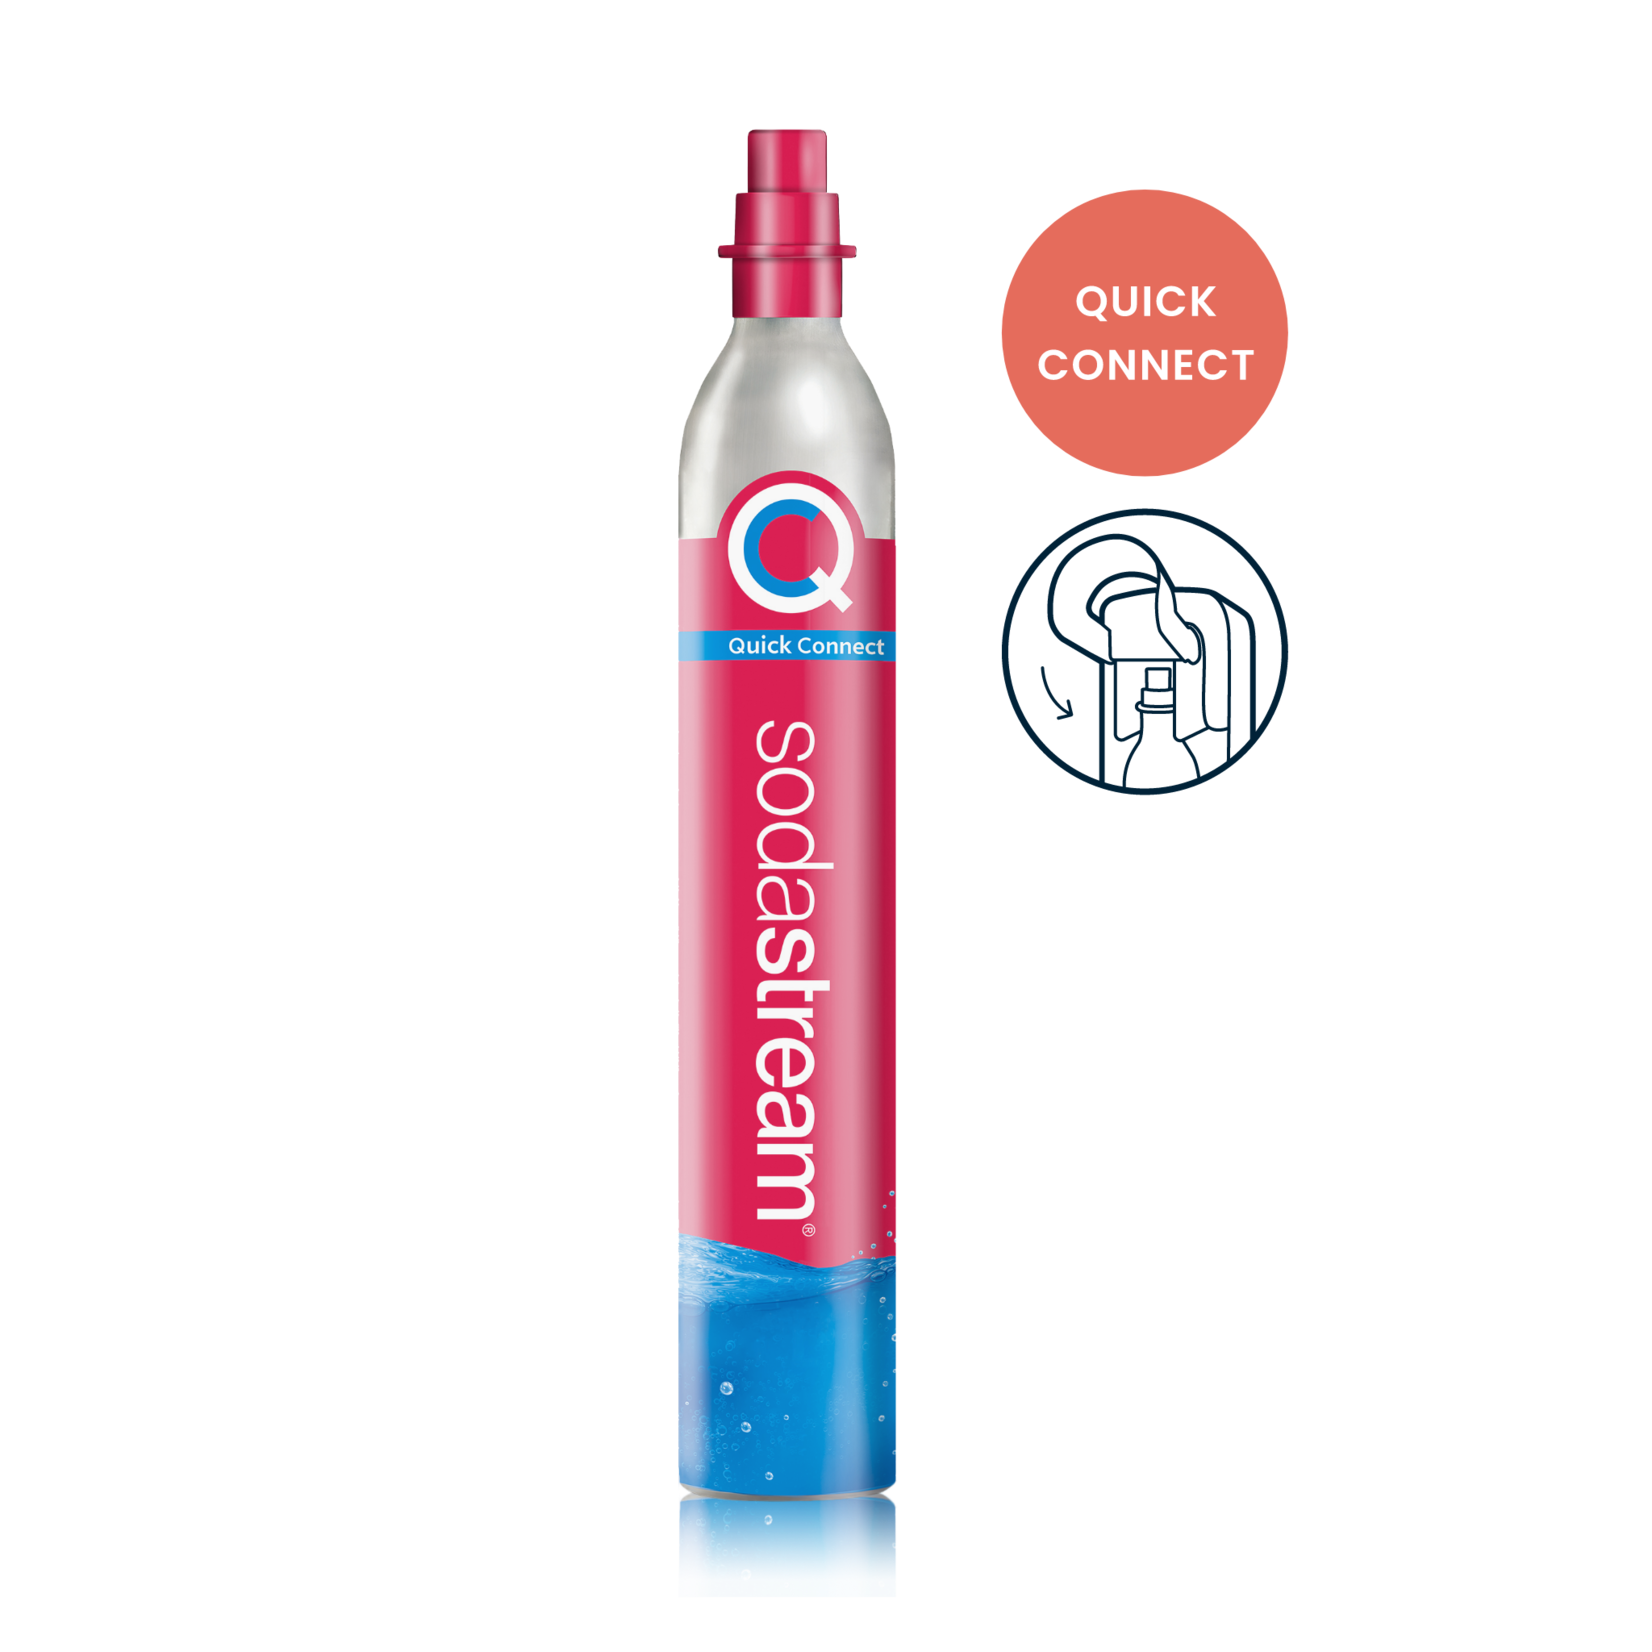 SODASTREAM CYLINDRE QUICK CONNECT 60l